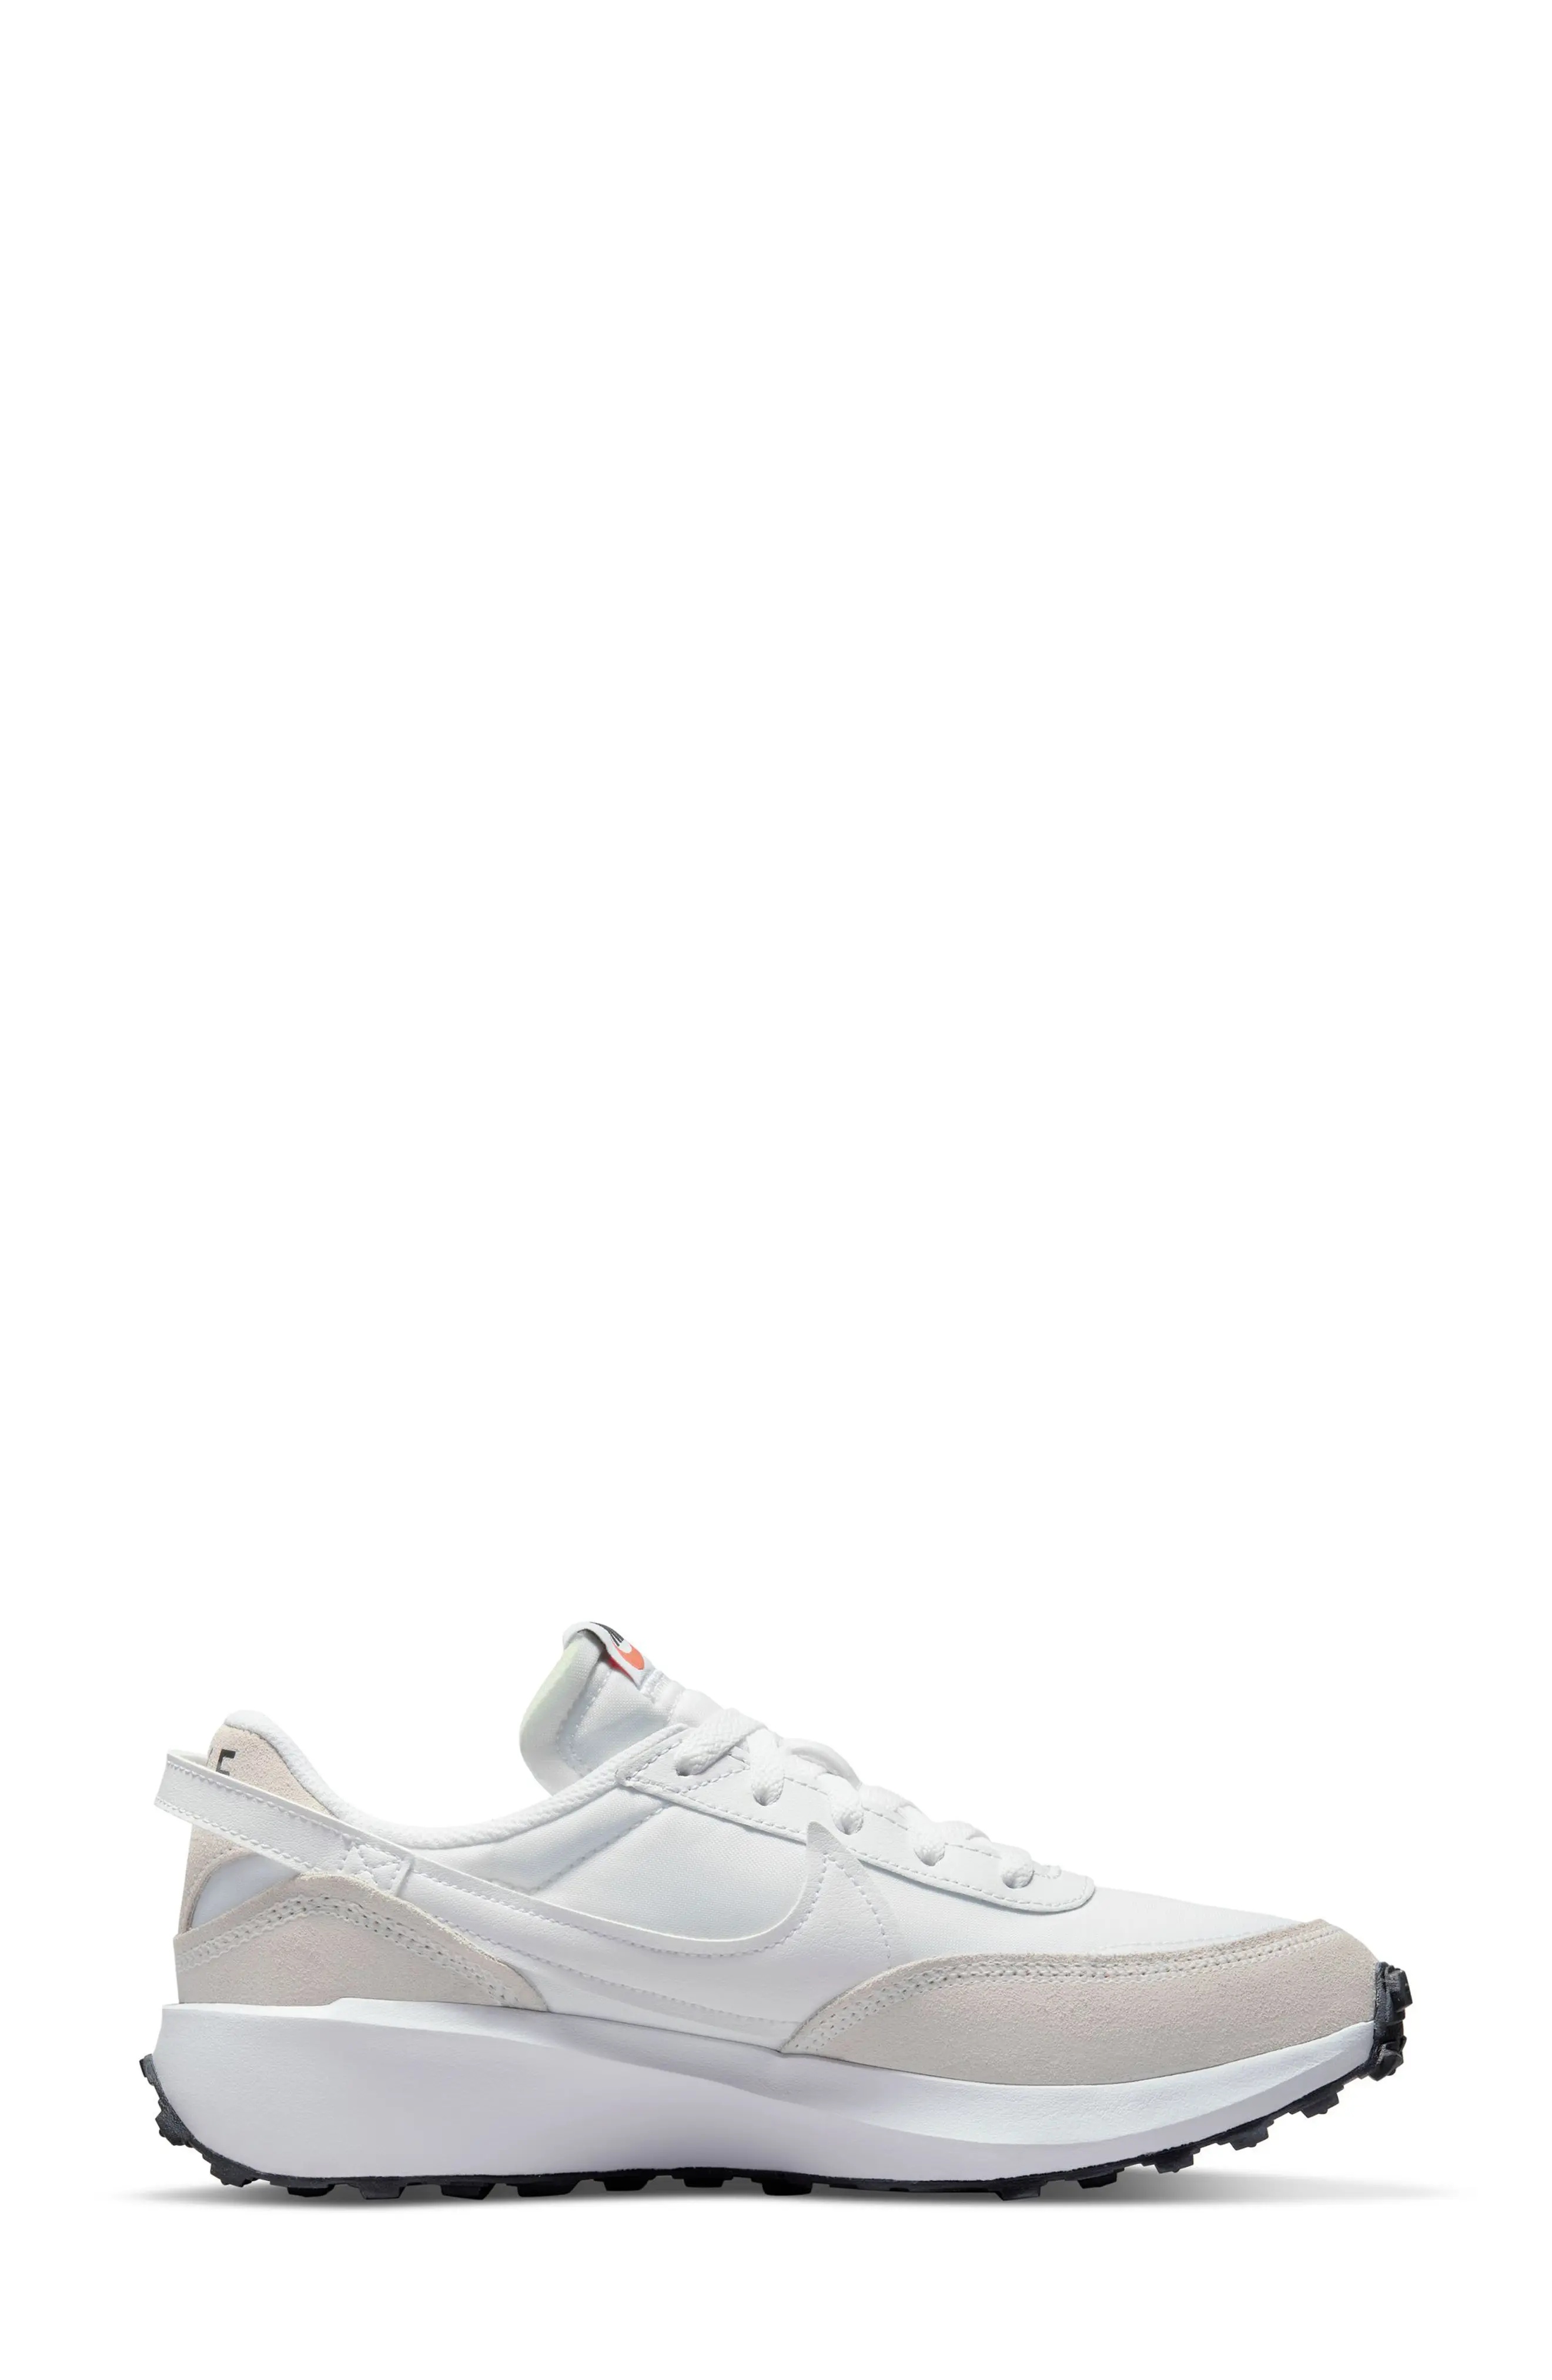 Waffle Debut Sneaker in White/White - 1